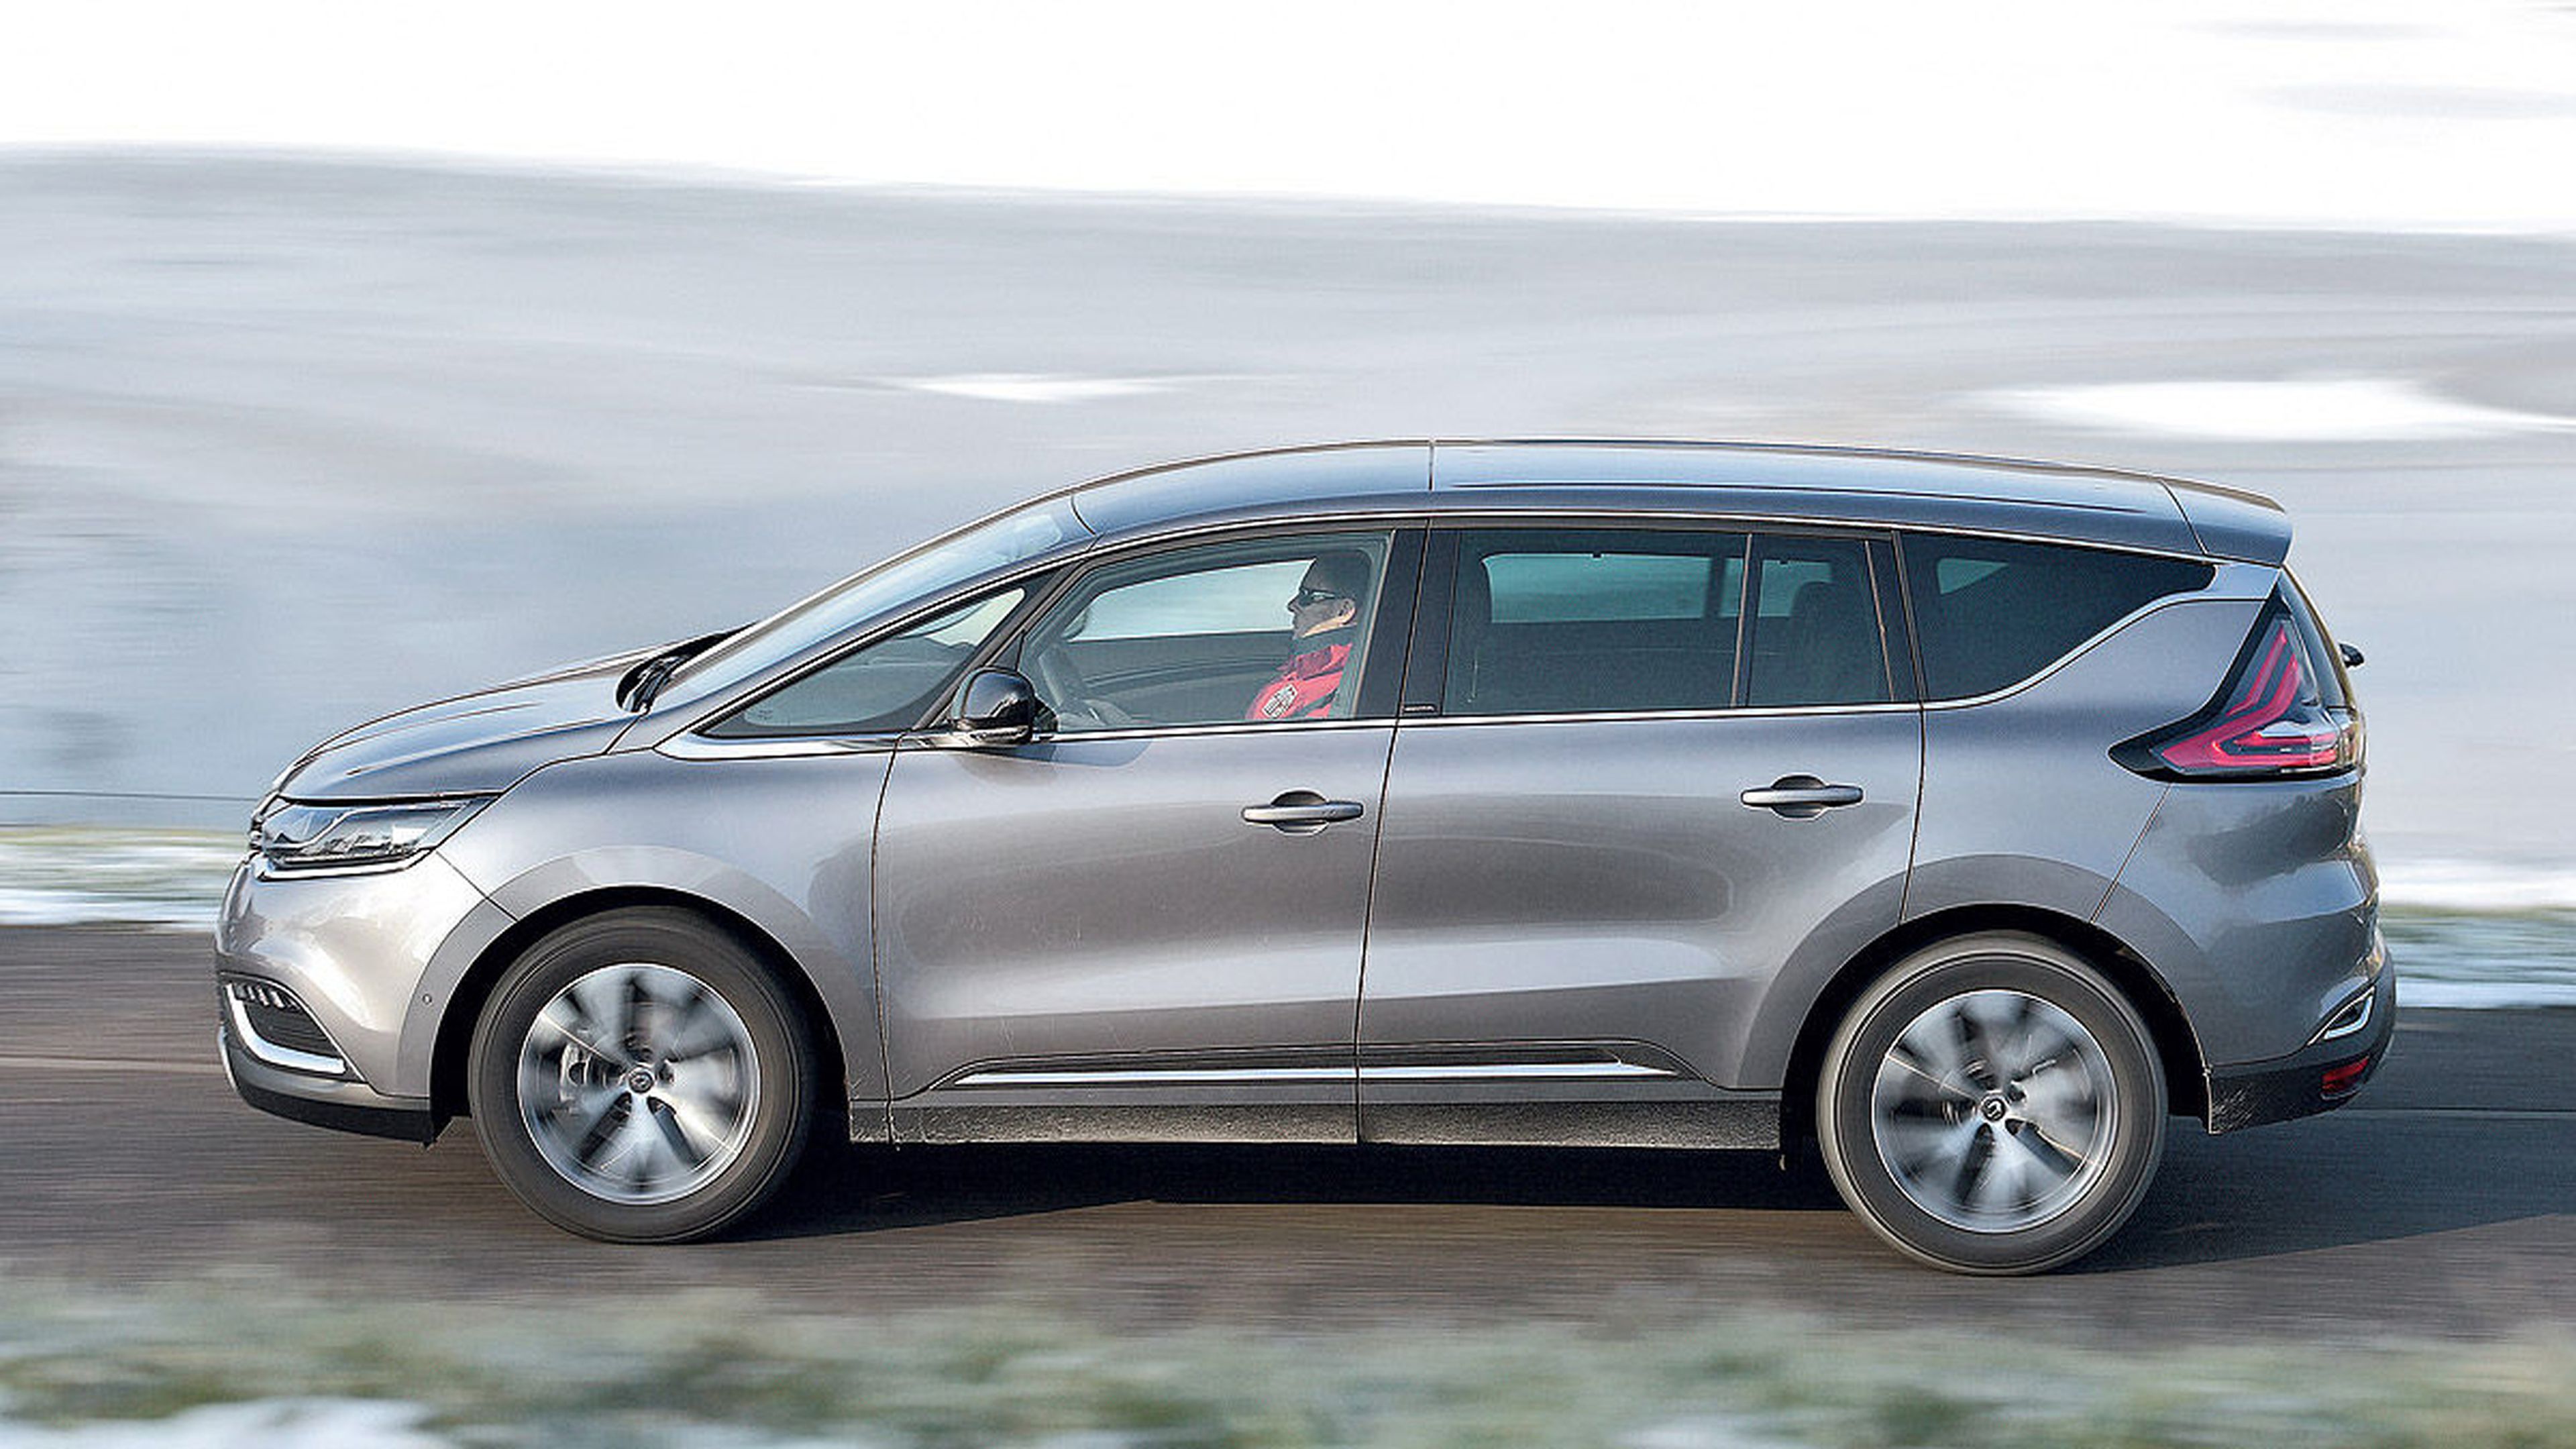 Renault Espace lateral